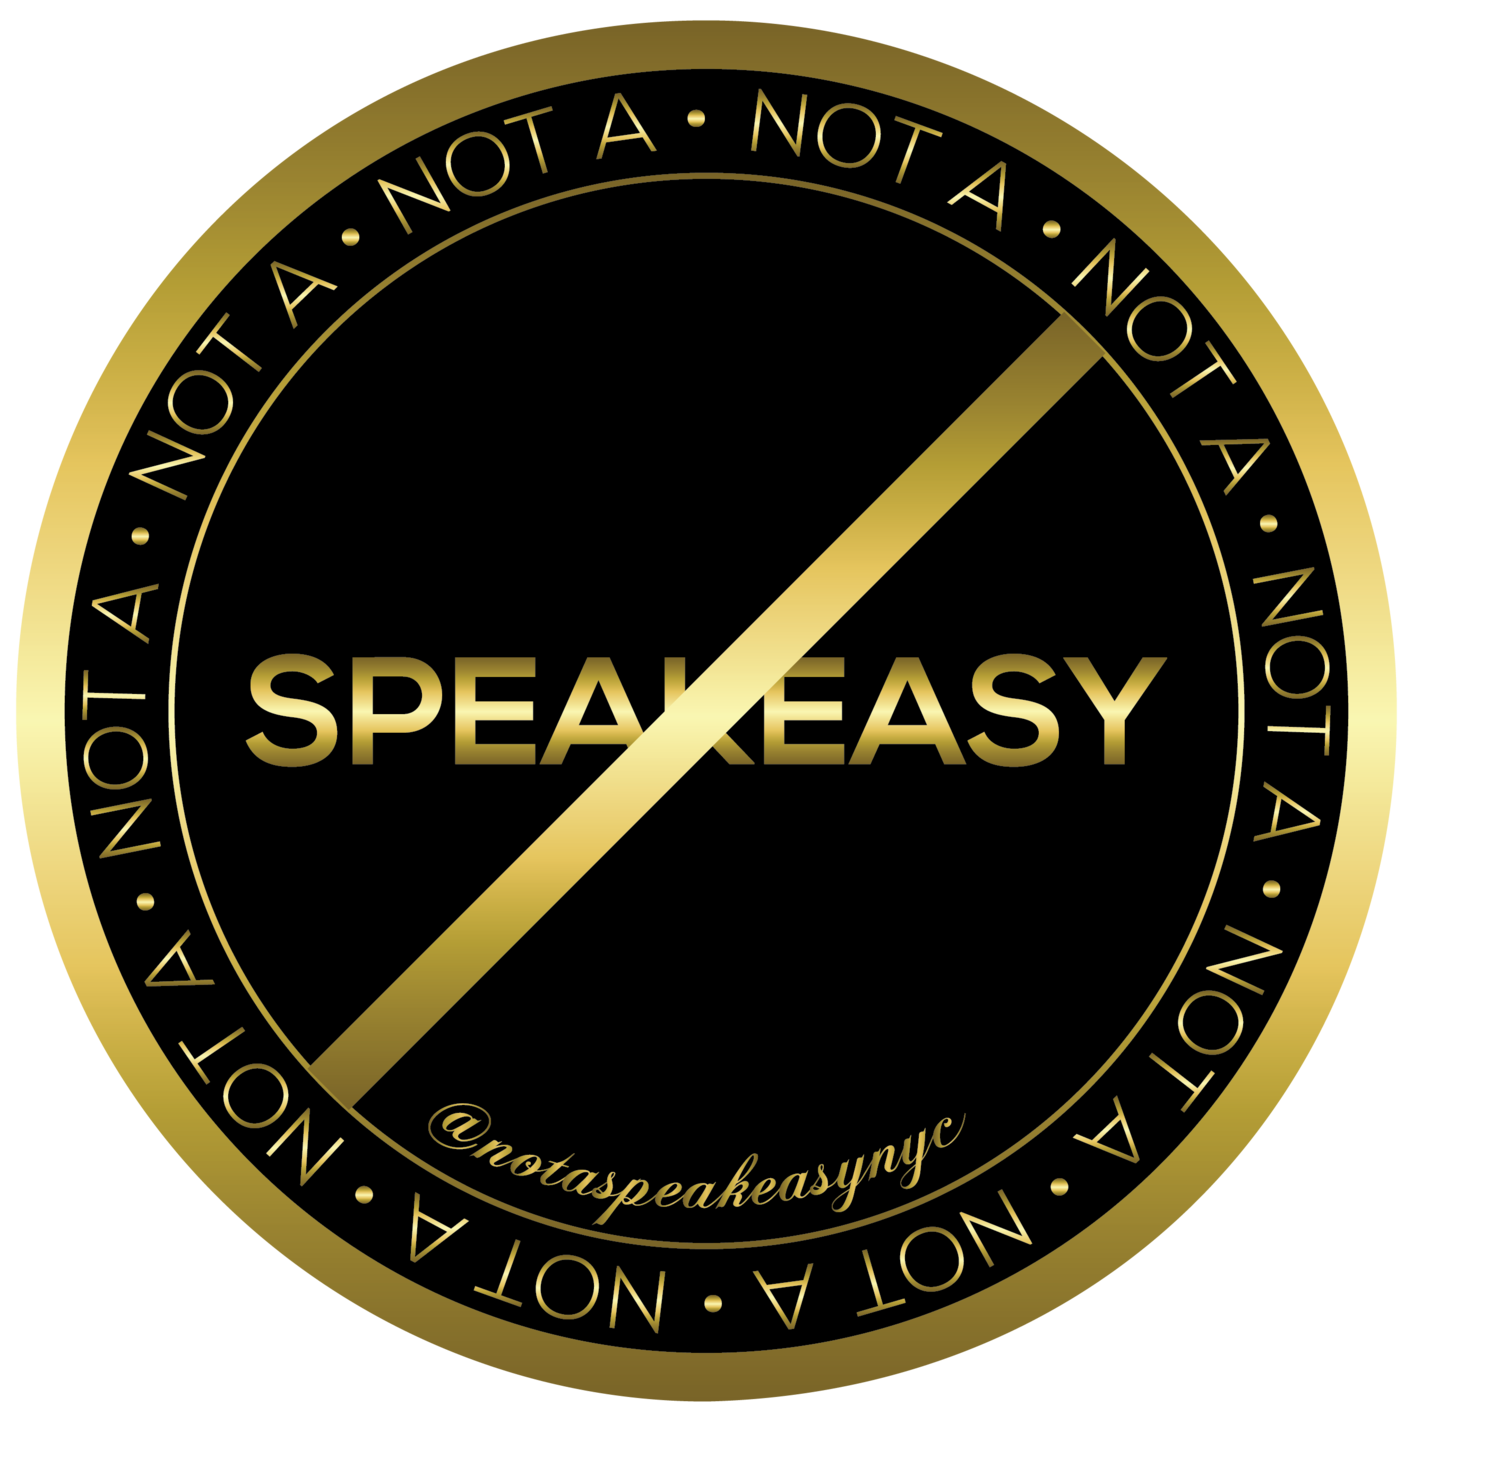 THIS IS NOT A SPEAKEASY